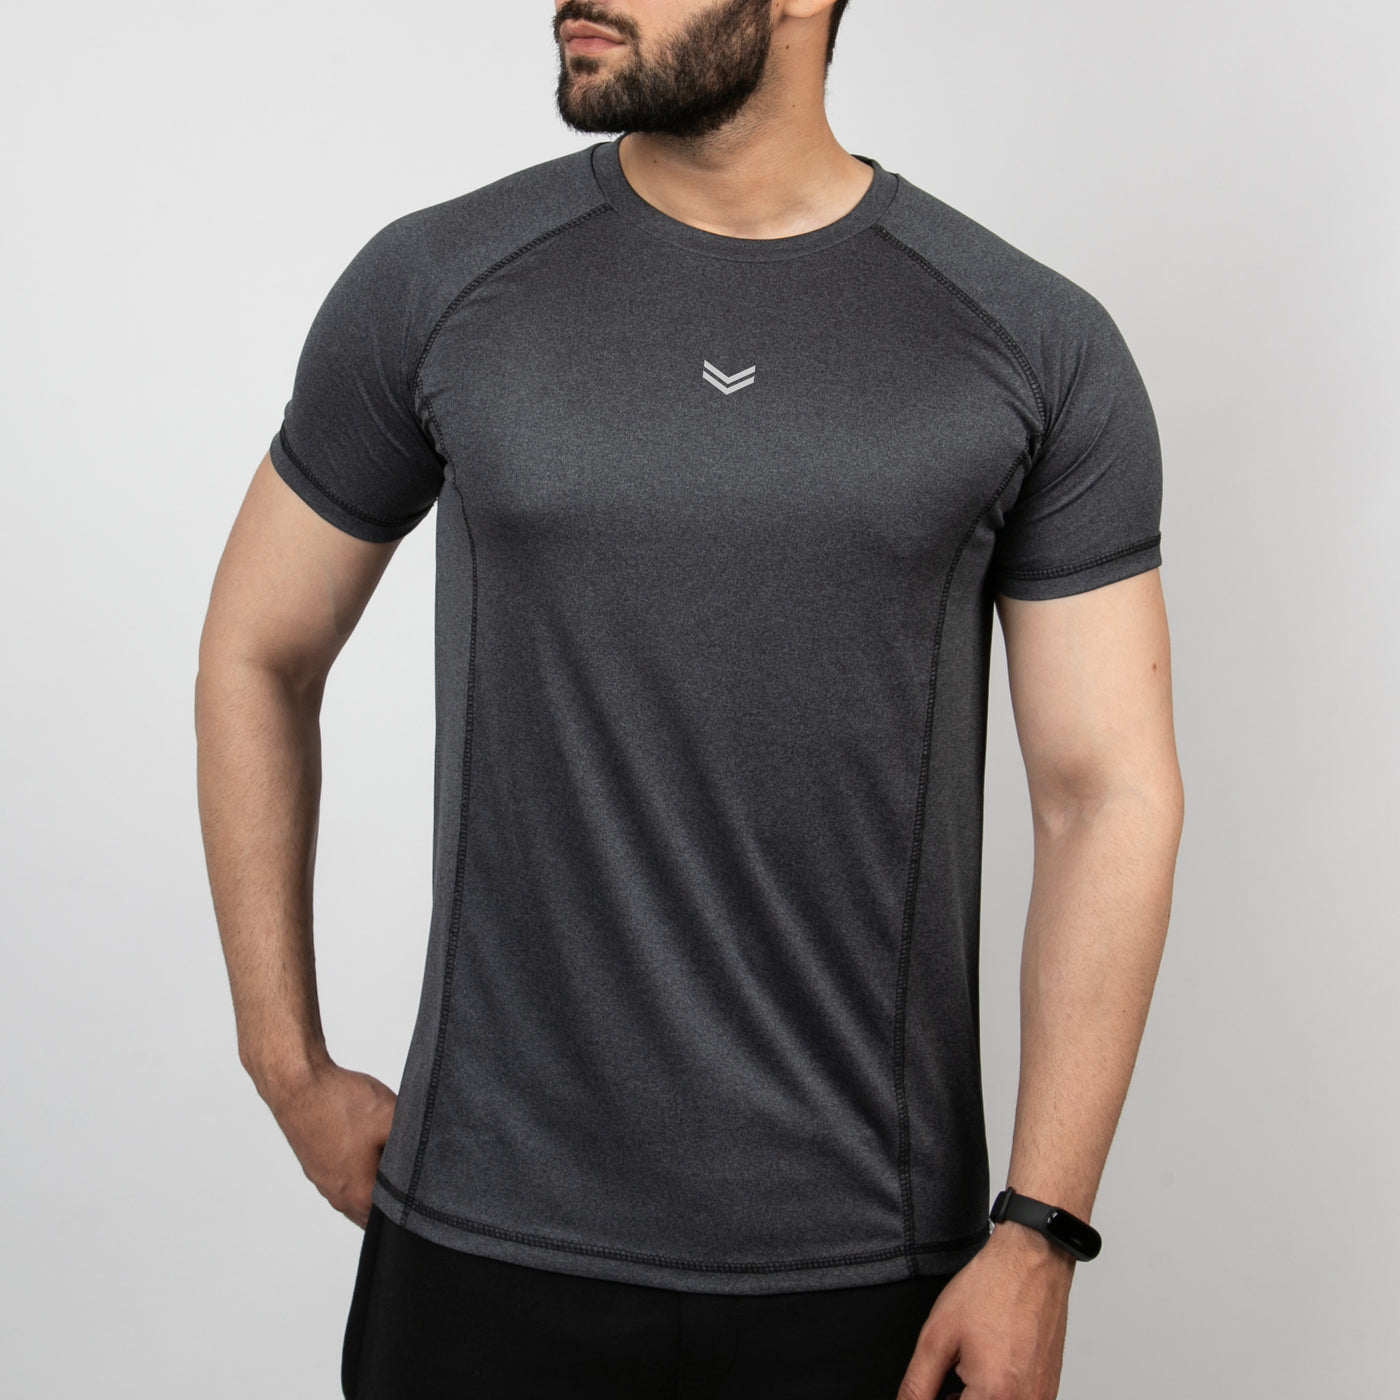 Textured Charcoal Quick Dry Tee with Thread Detailing & Reflector Logo